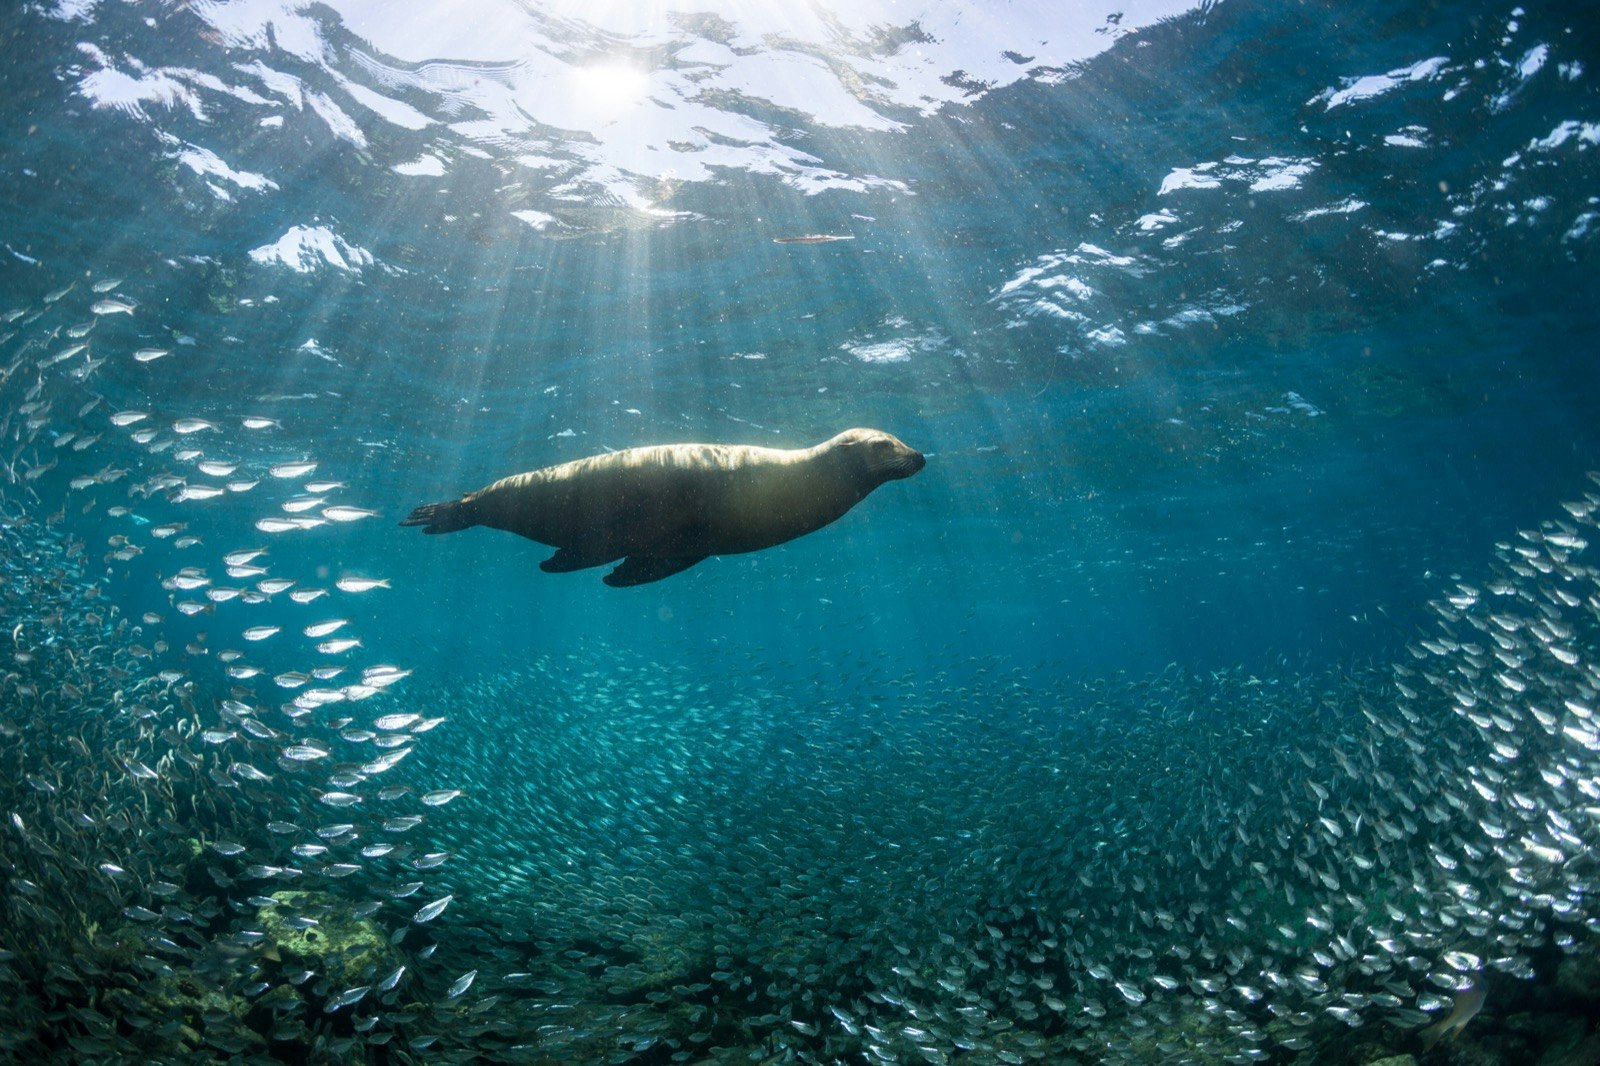 A sea lion swims among a school of fish 